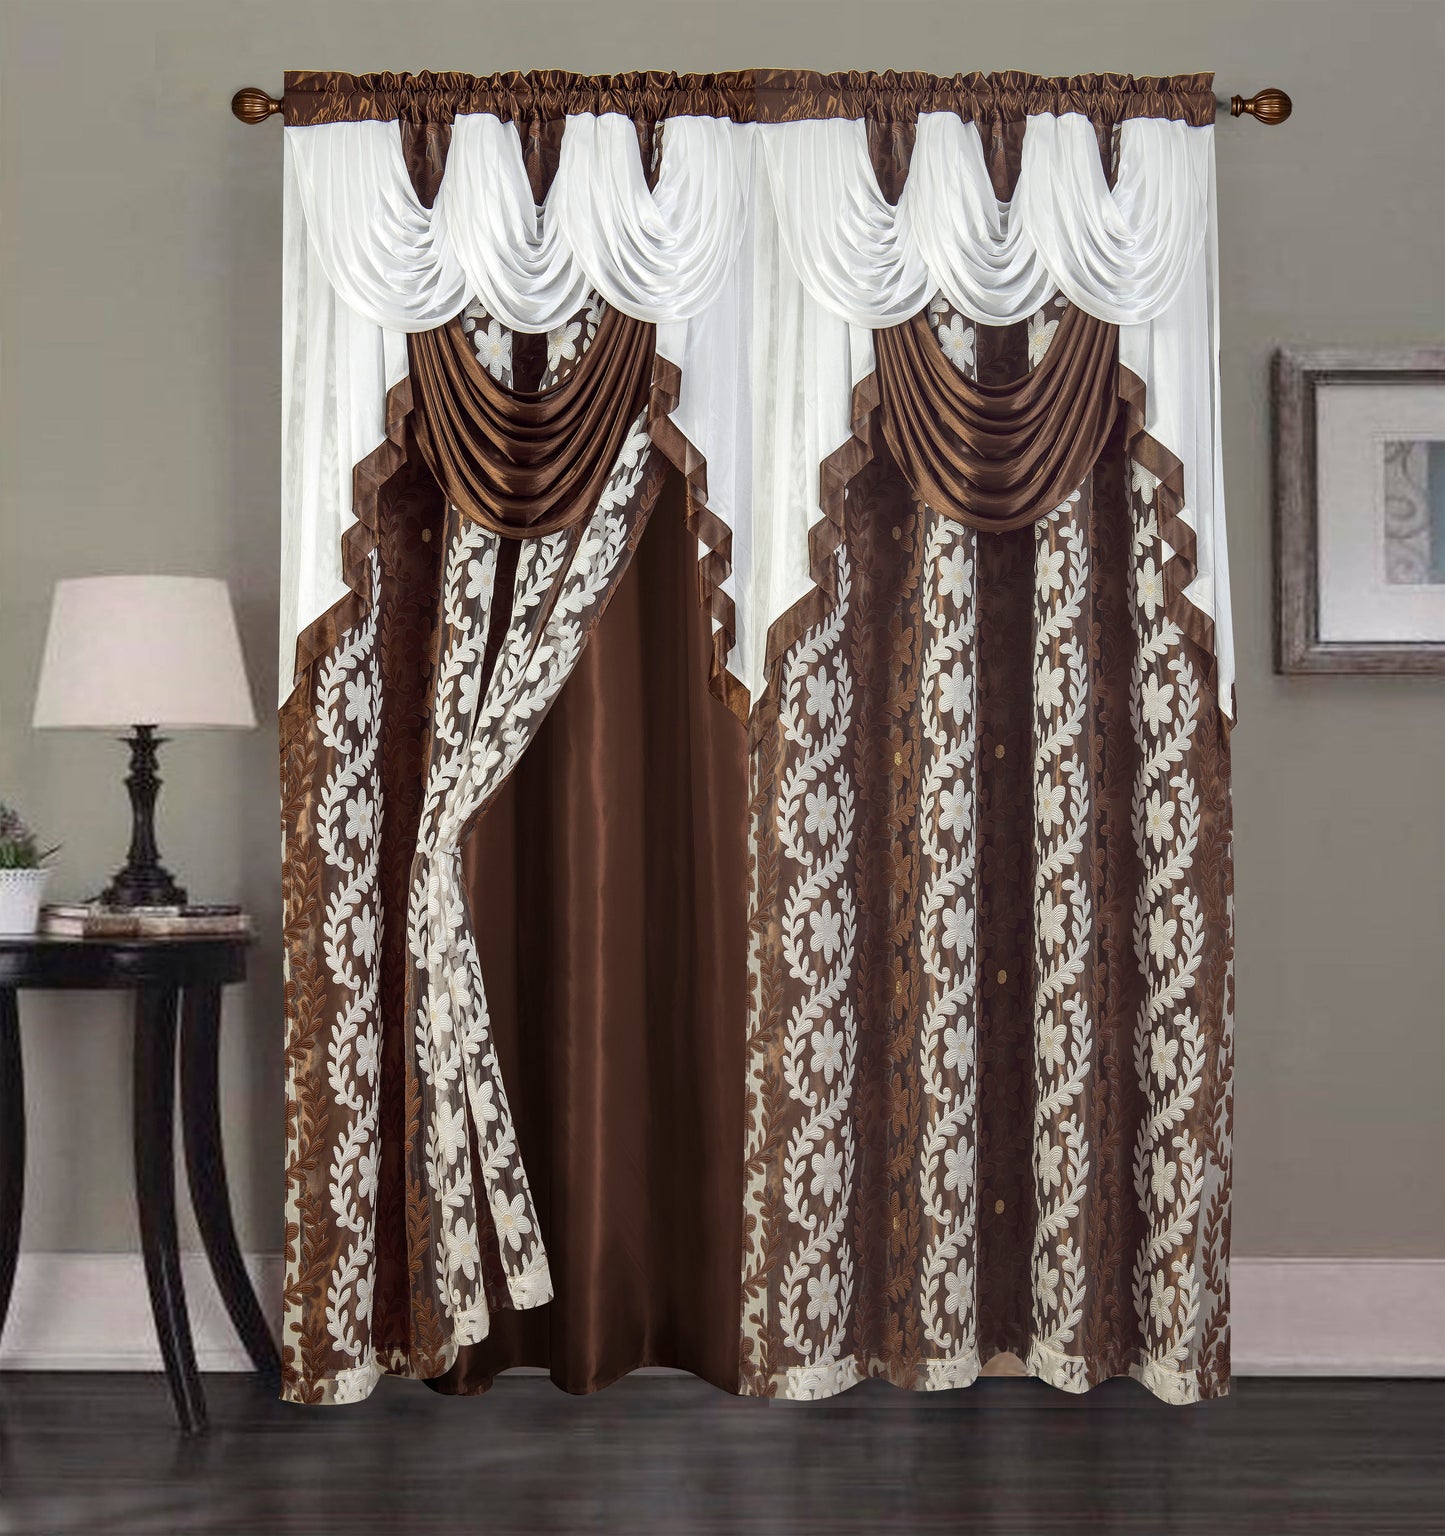 2PC CURTAIN SET W/ ATTACHED VALANCE & BACKING - Isla